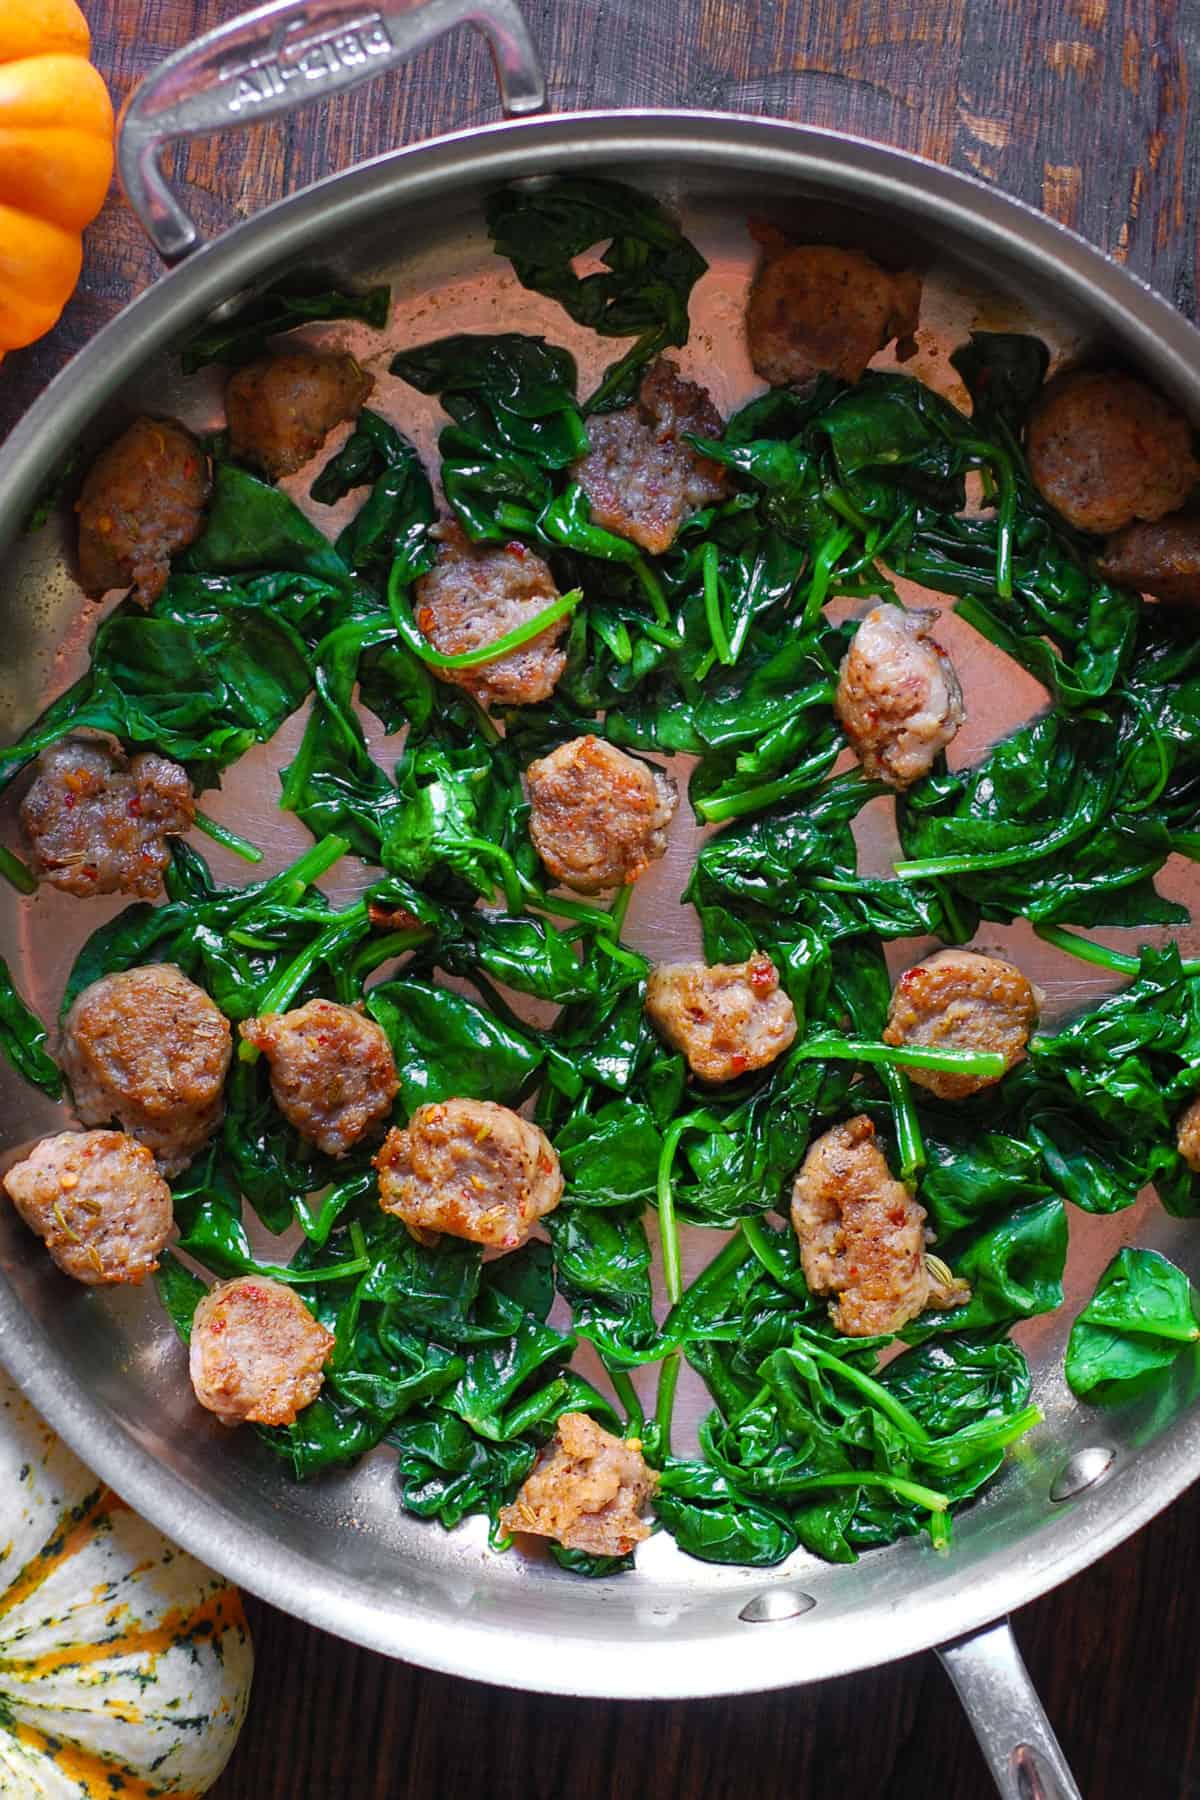 Cooked sliced sausage and cooked spinach - in a stainless steel pan.